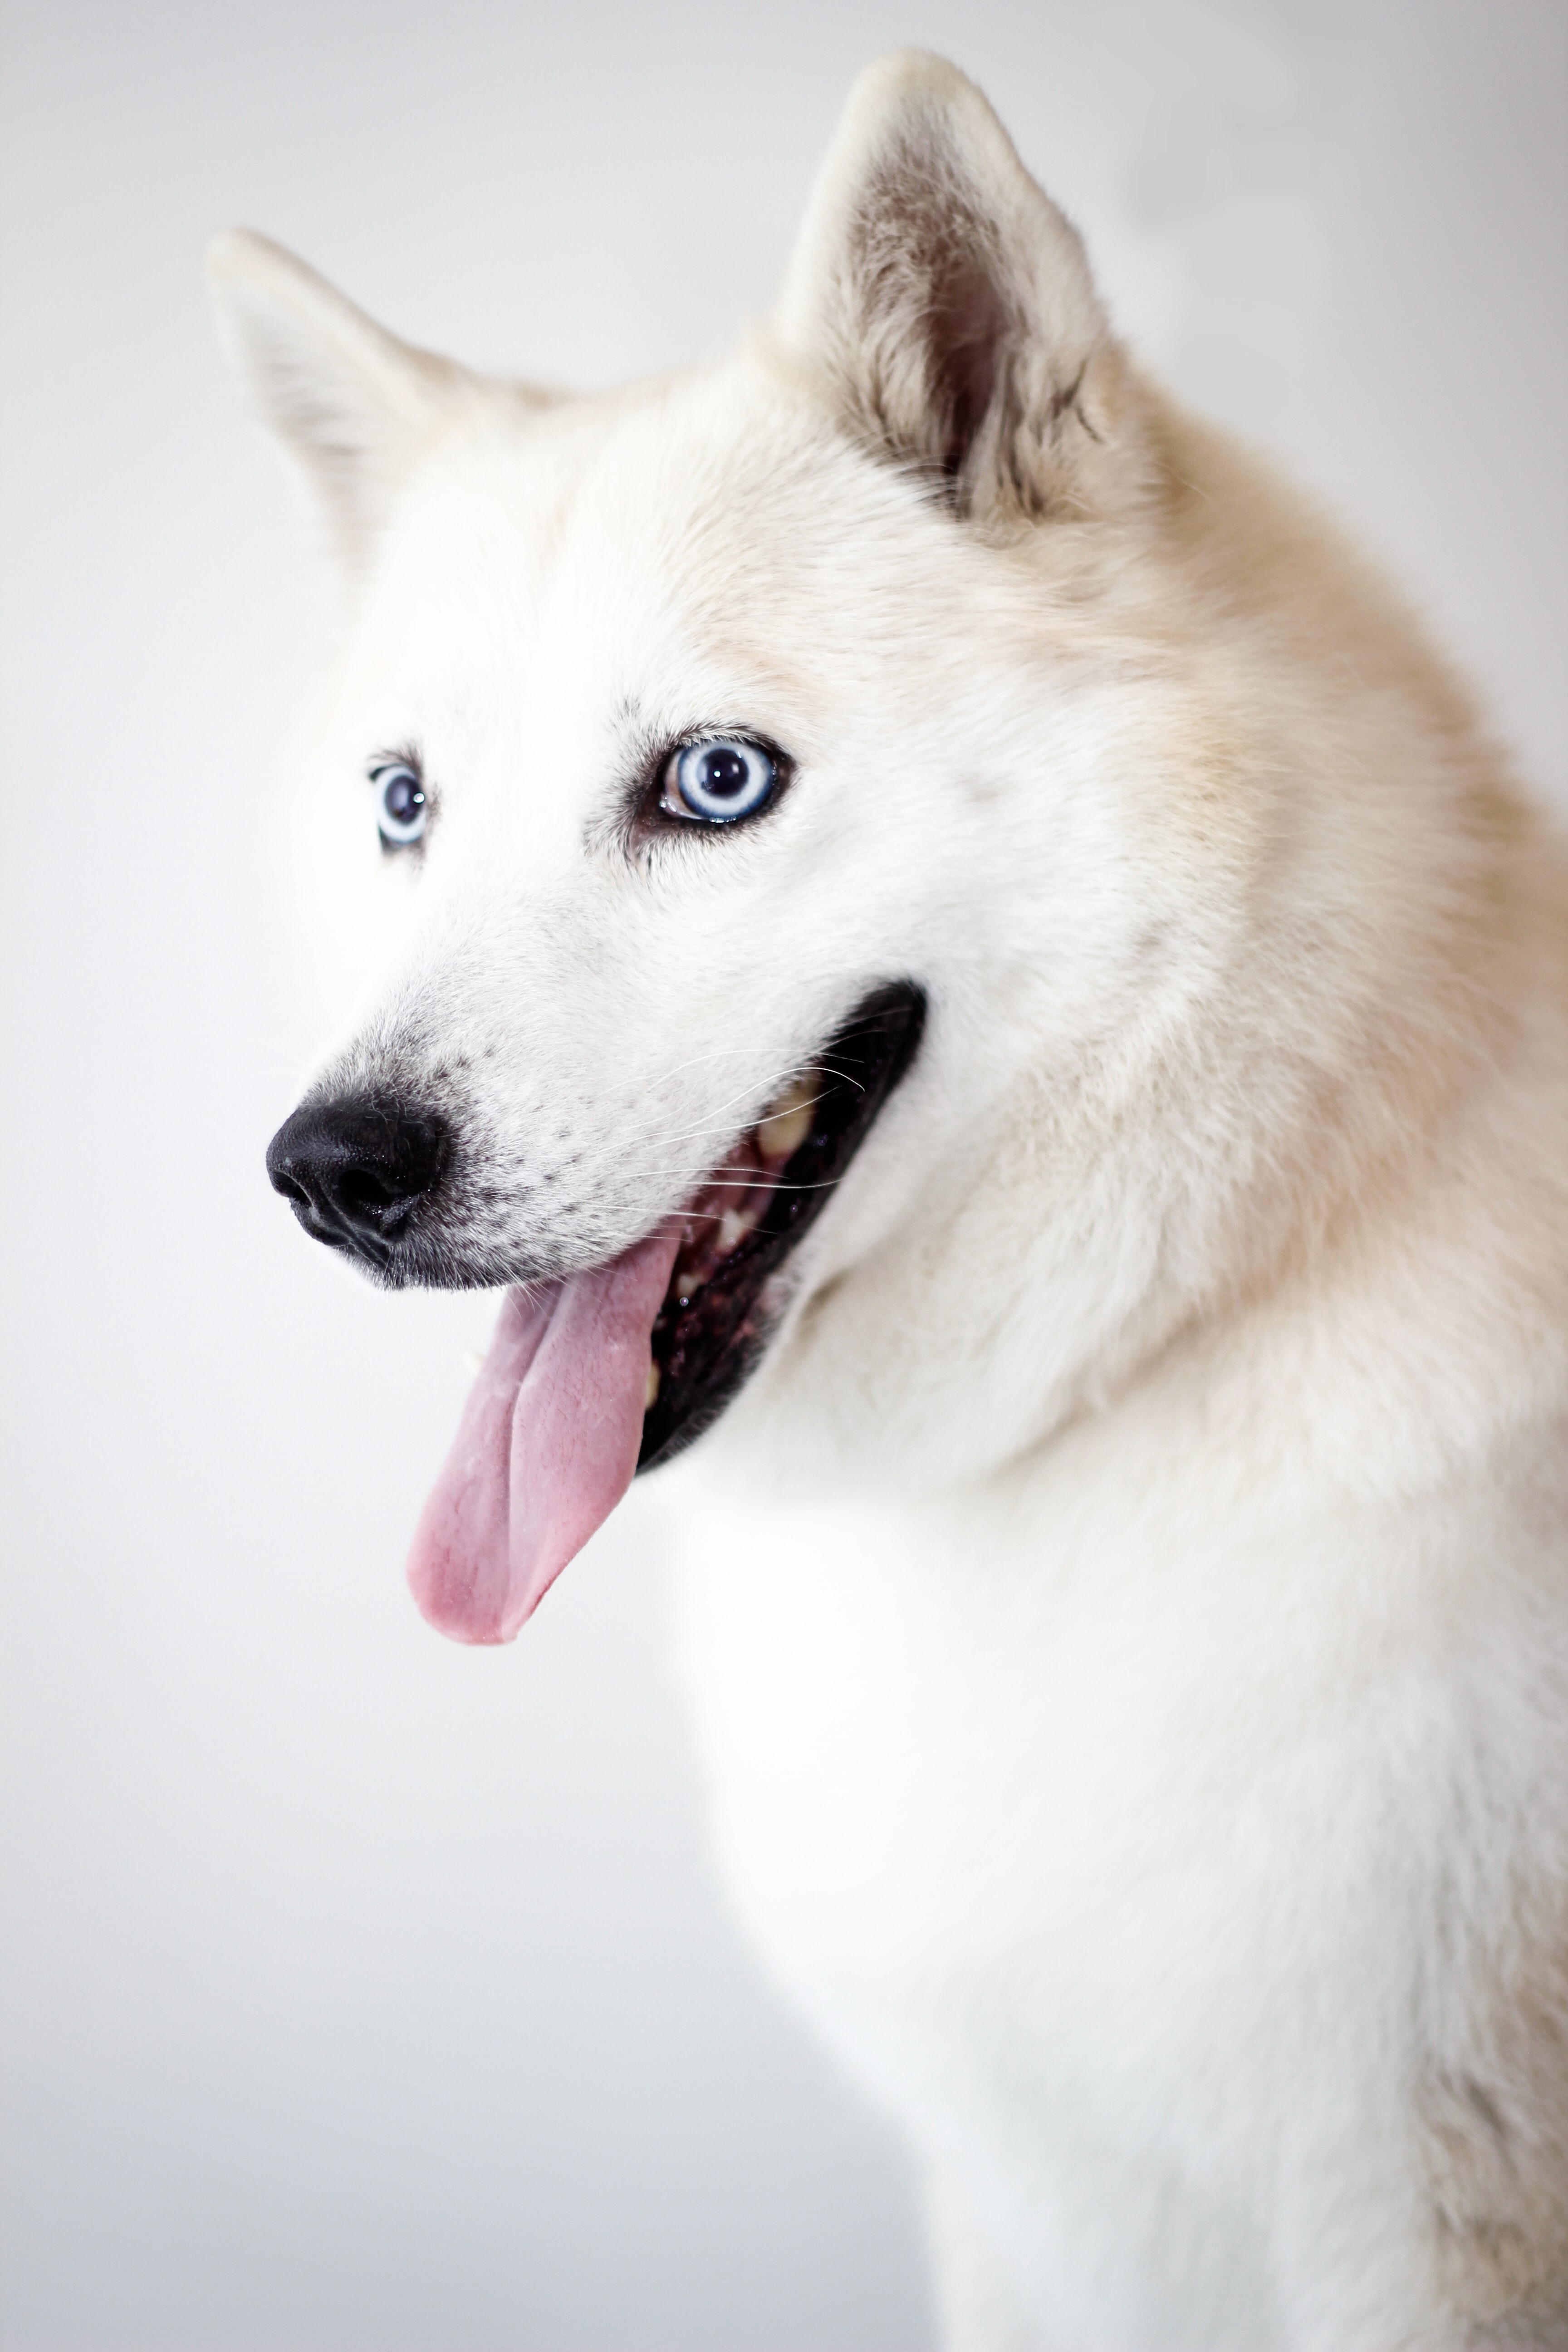 tongue stuck out, husky, animals, white, dog, protruding tongue